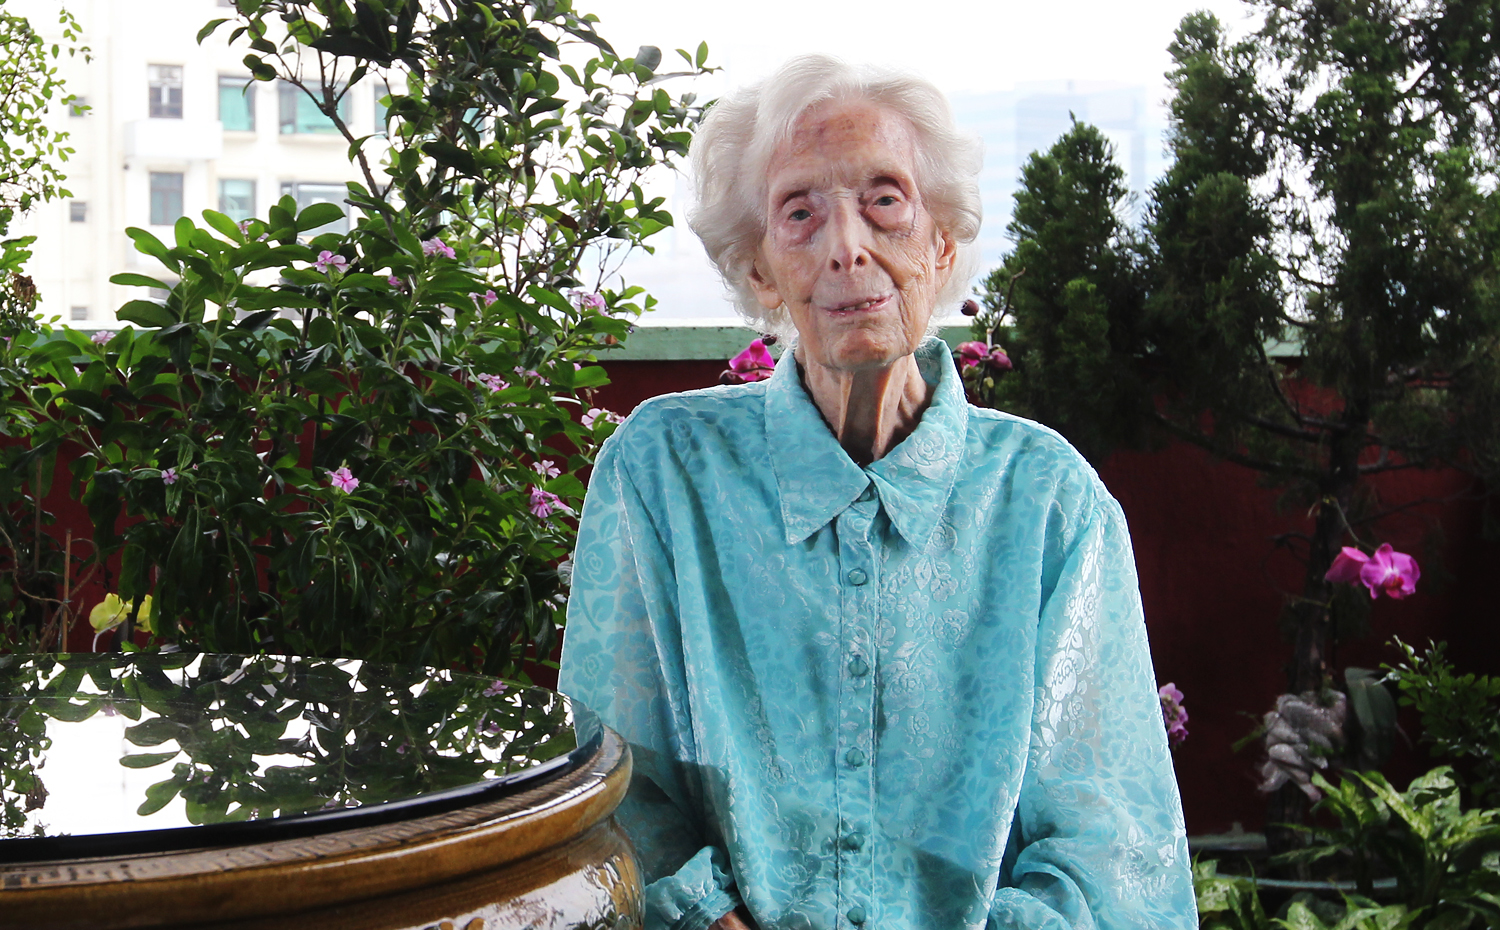 Elsie Tu, former lawmaker and social activist, is interviewed at her home in Kwun Tong. She will celebrate her 100th birthday on May 31. 16APR13